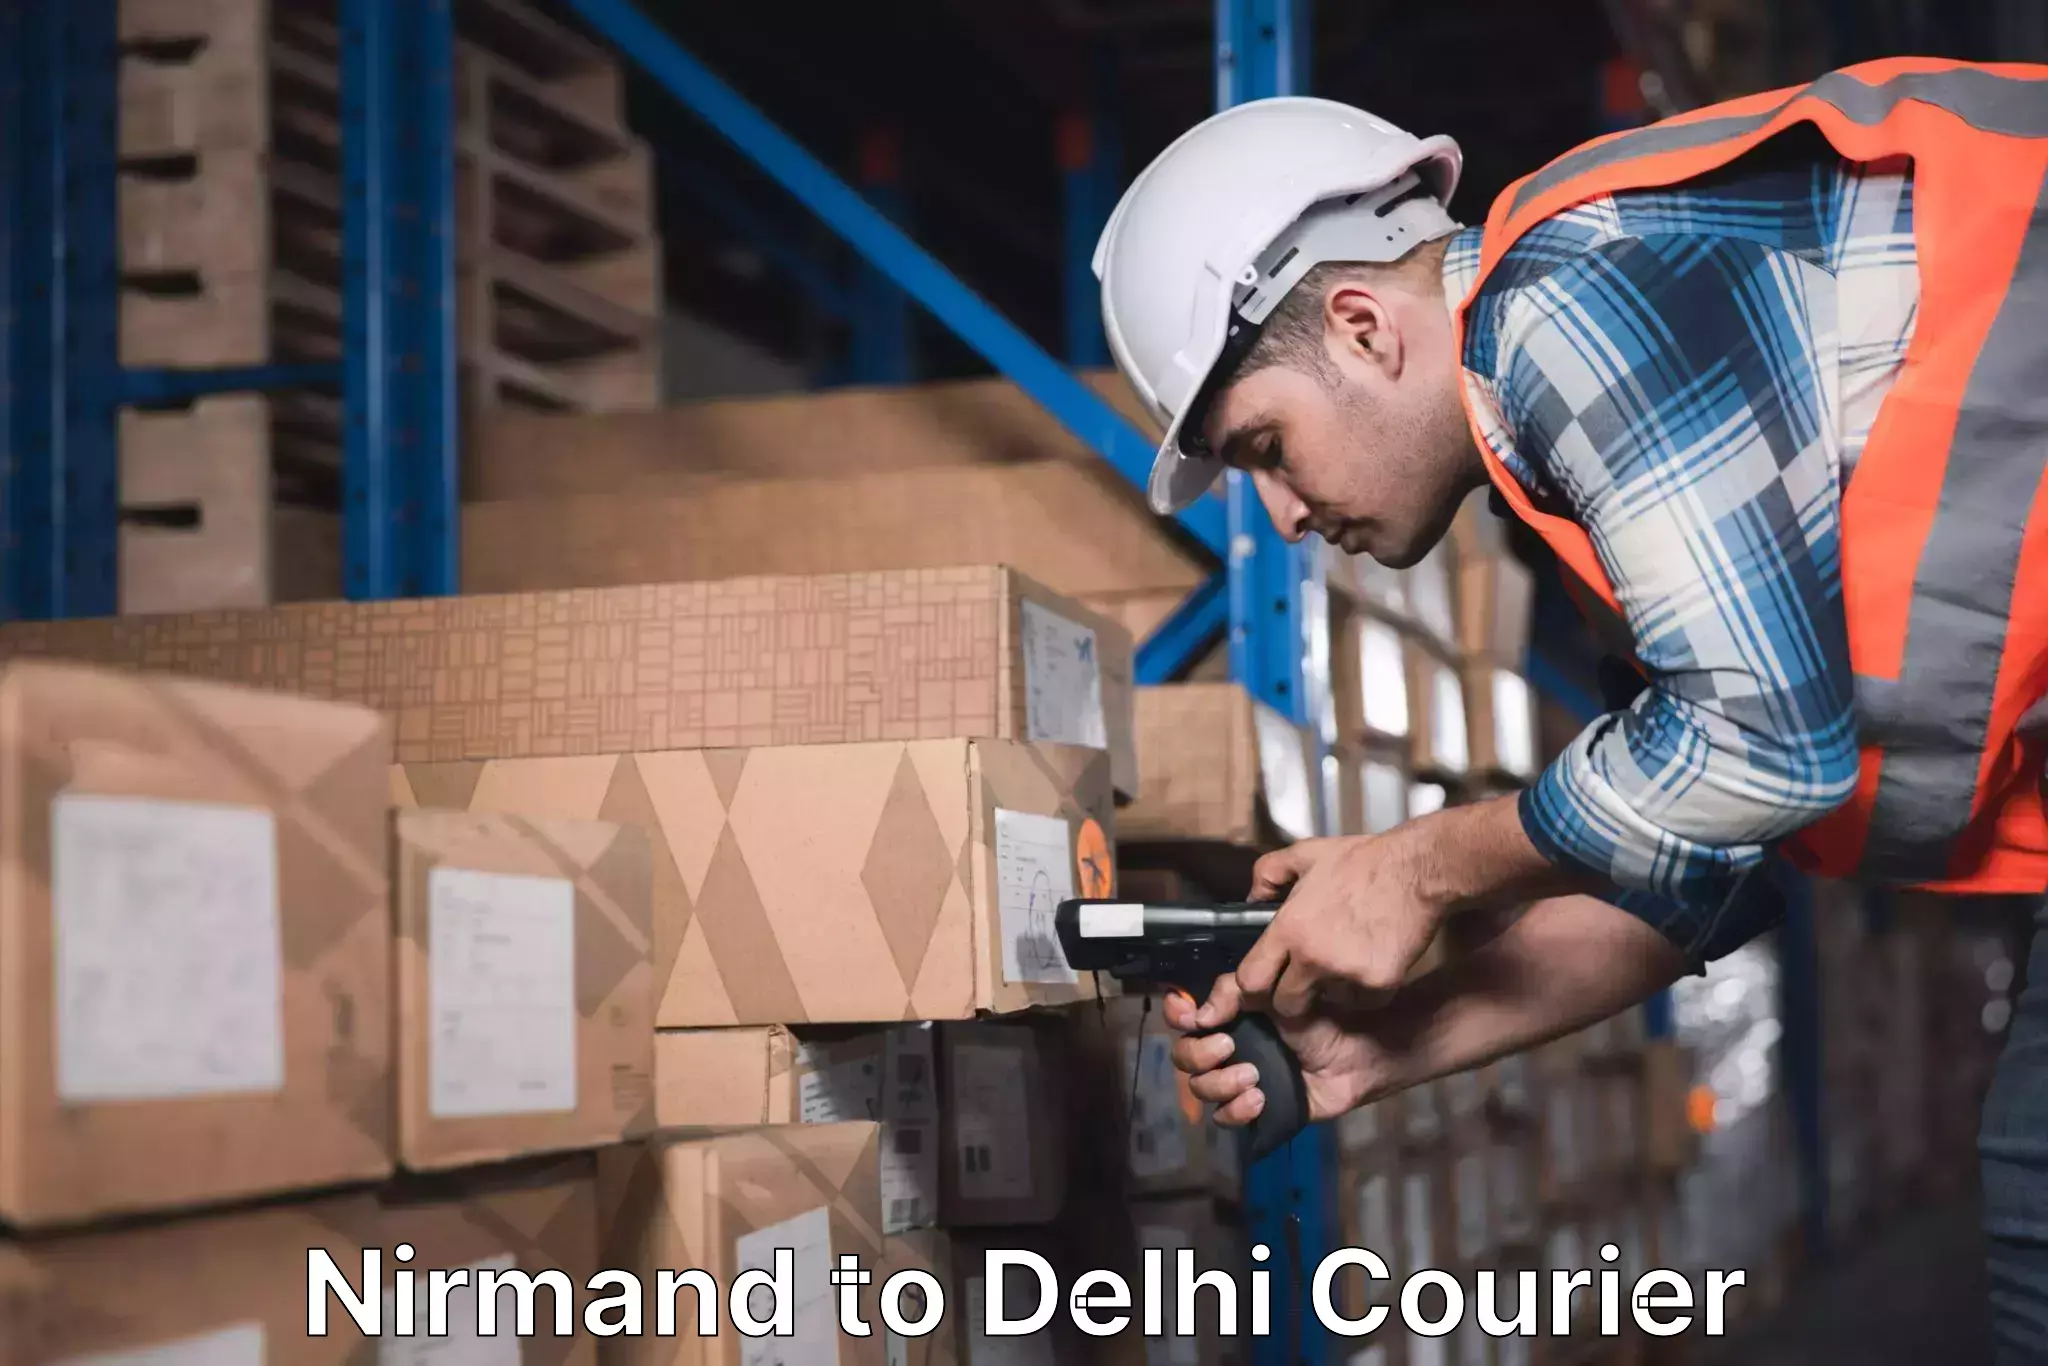 Express delivery network Nirmand to East Delhi